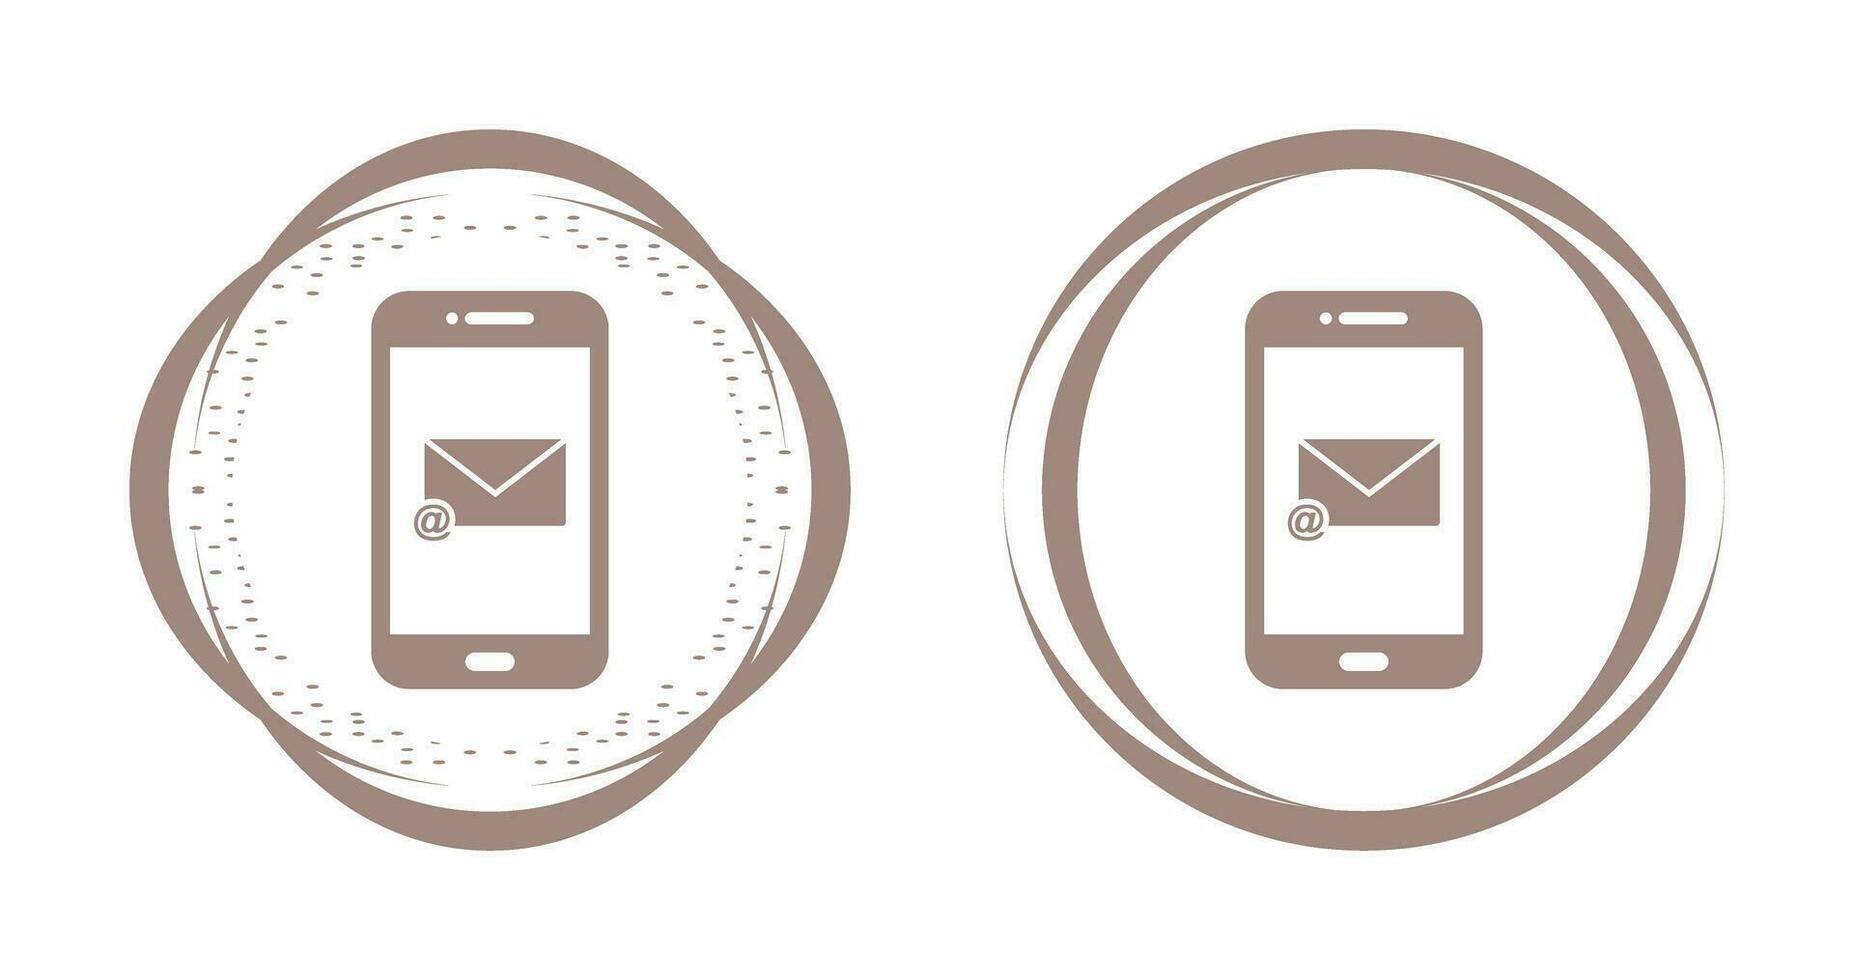 Email App Vector Icon